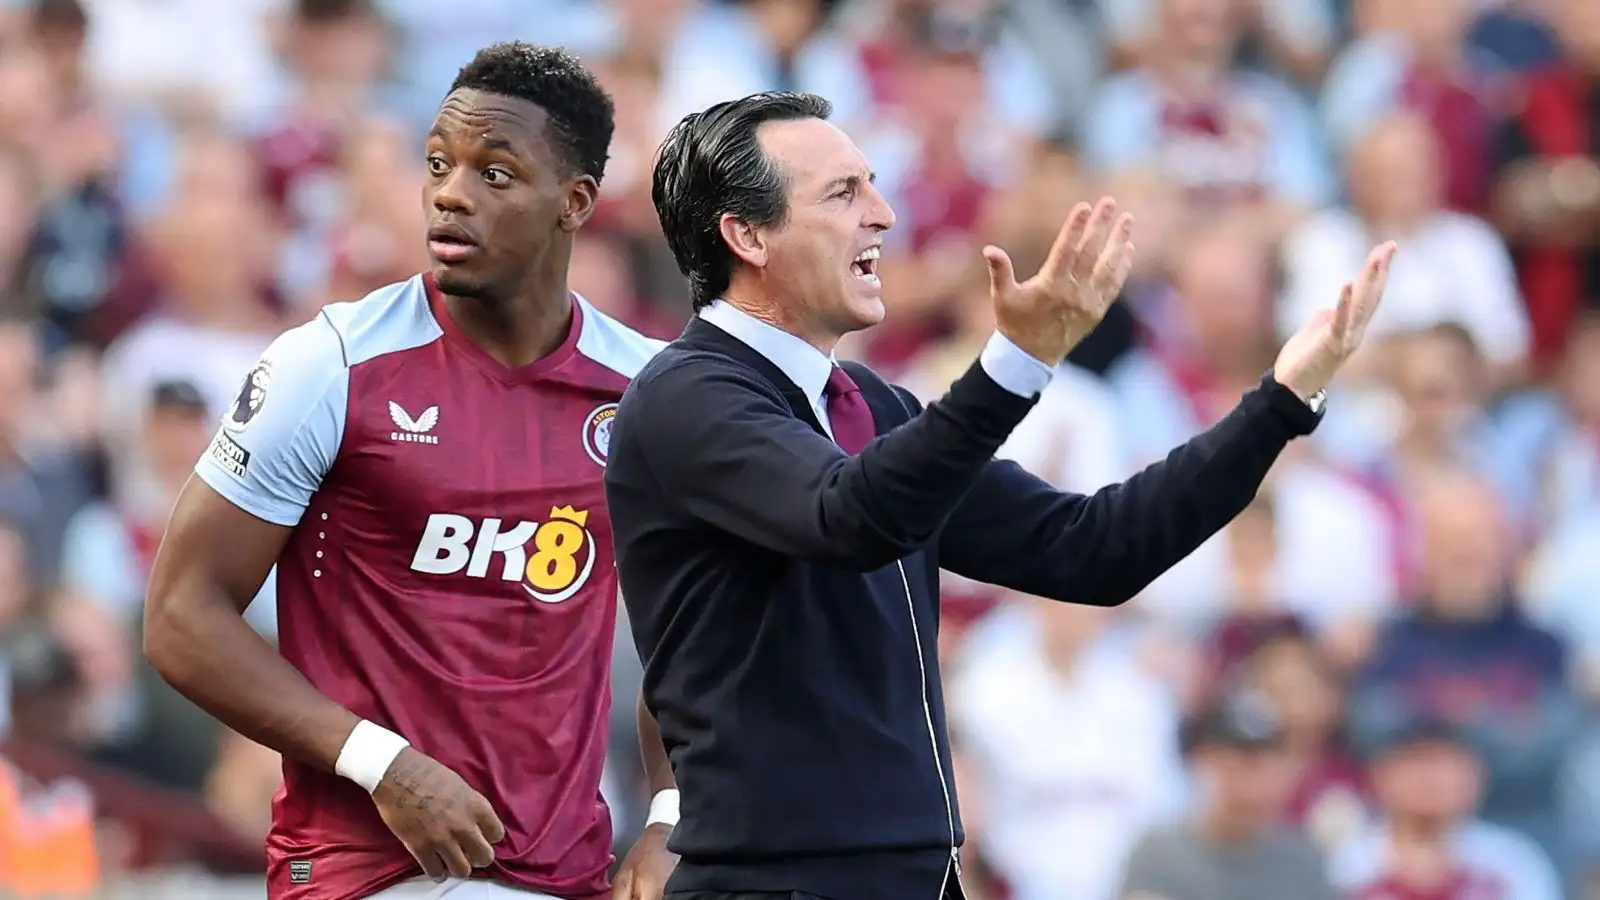 Unai Emery motions while Jhon Duran prepares to come on.